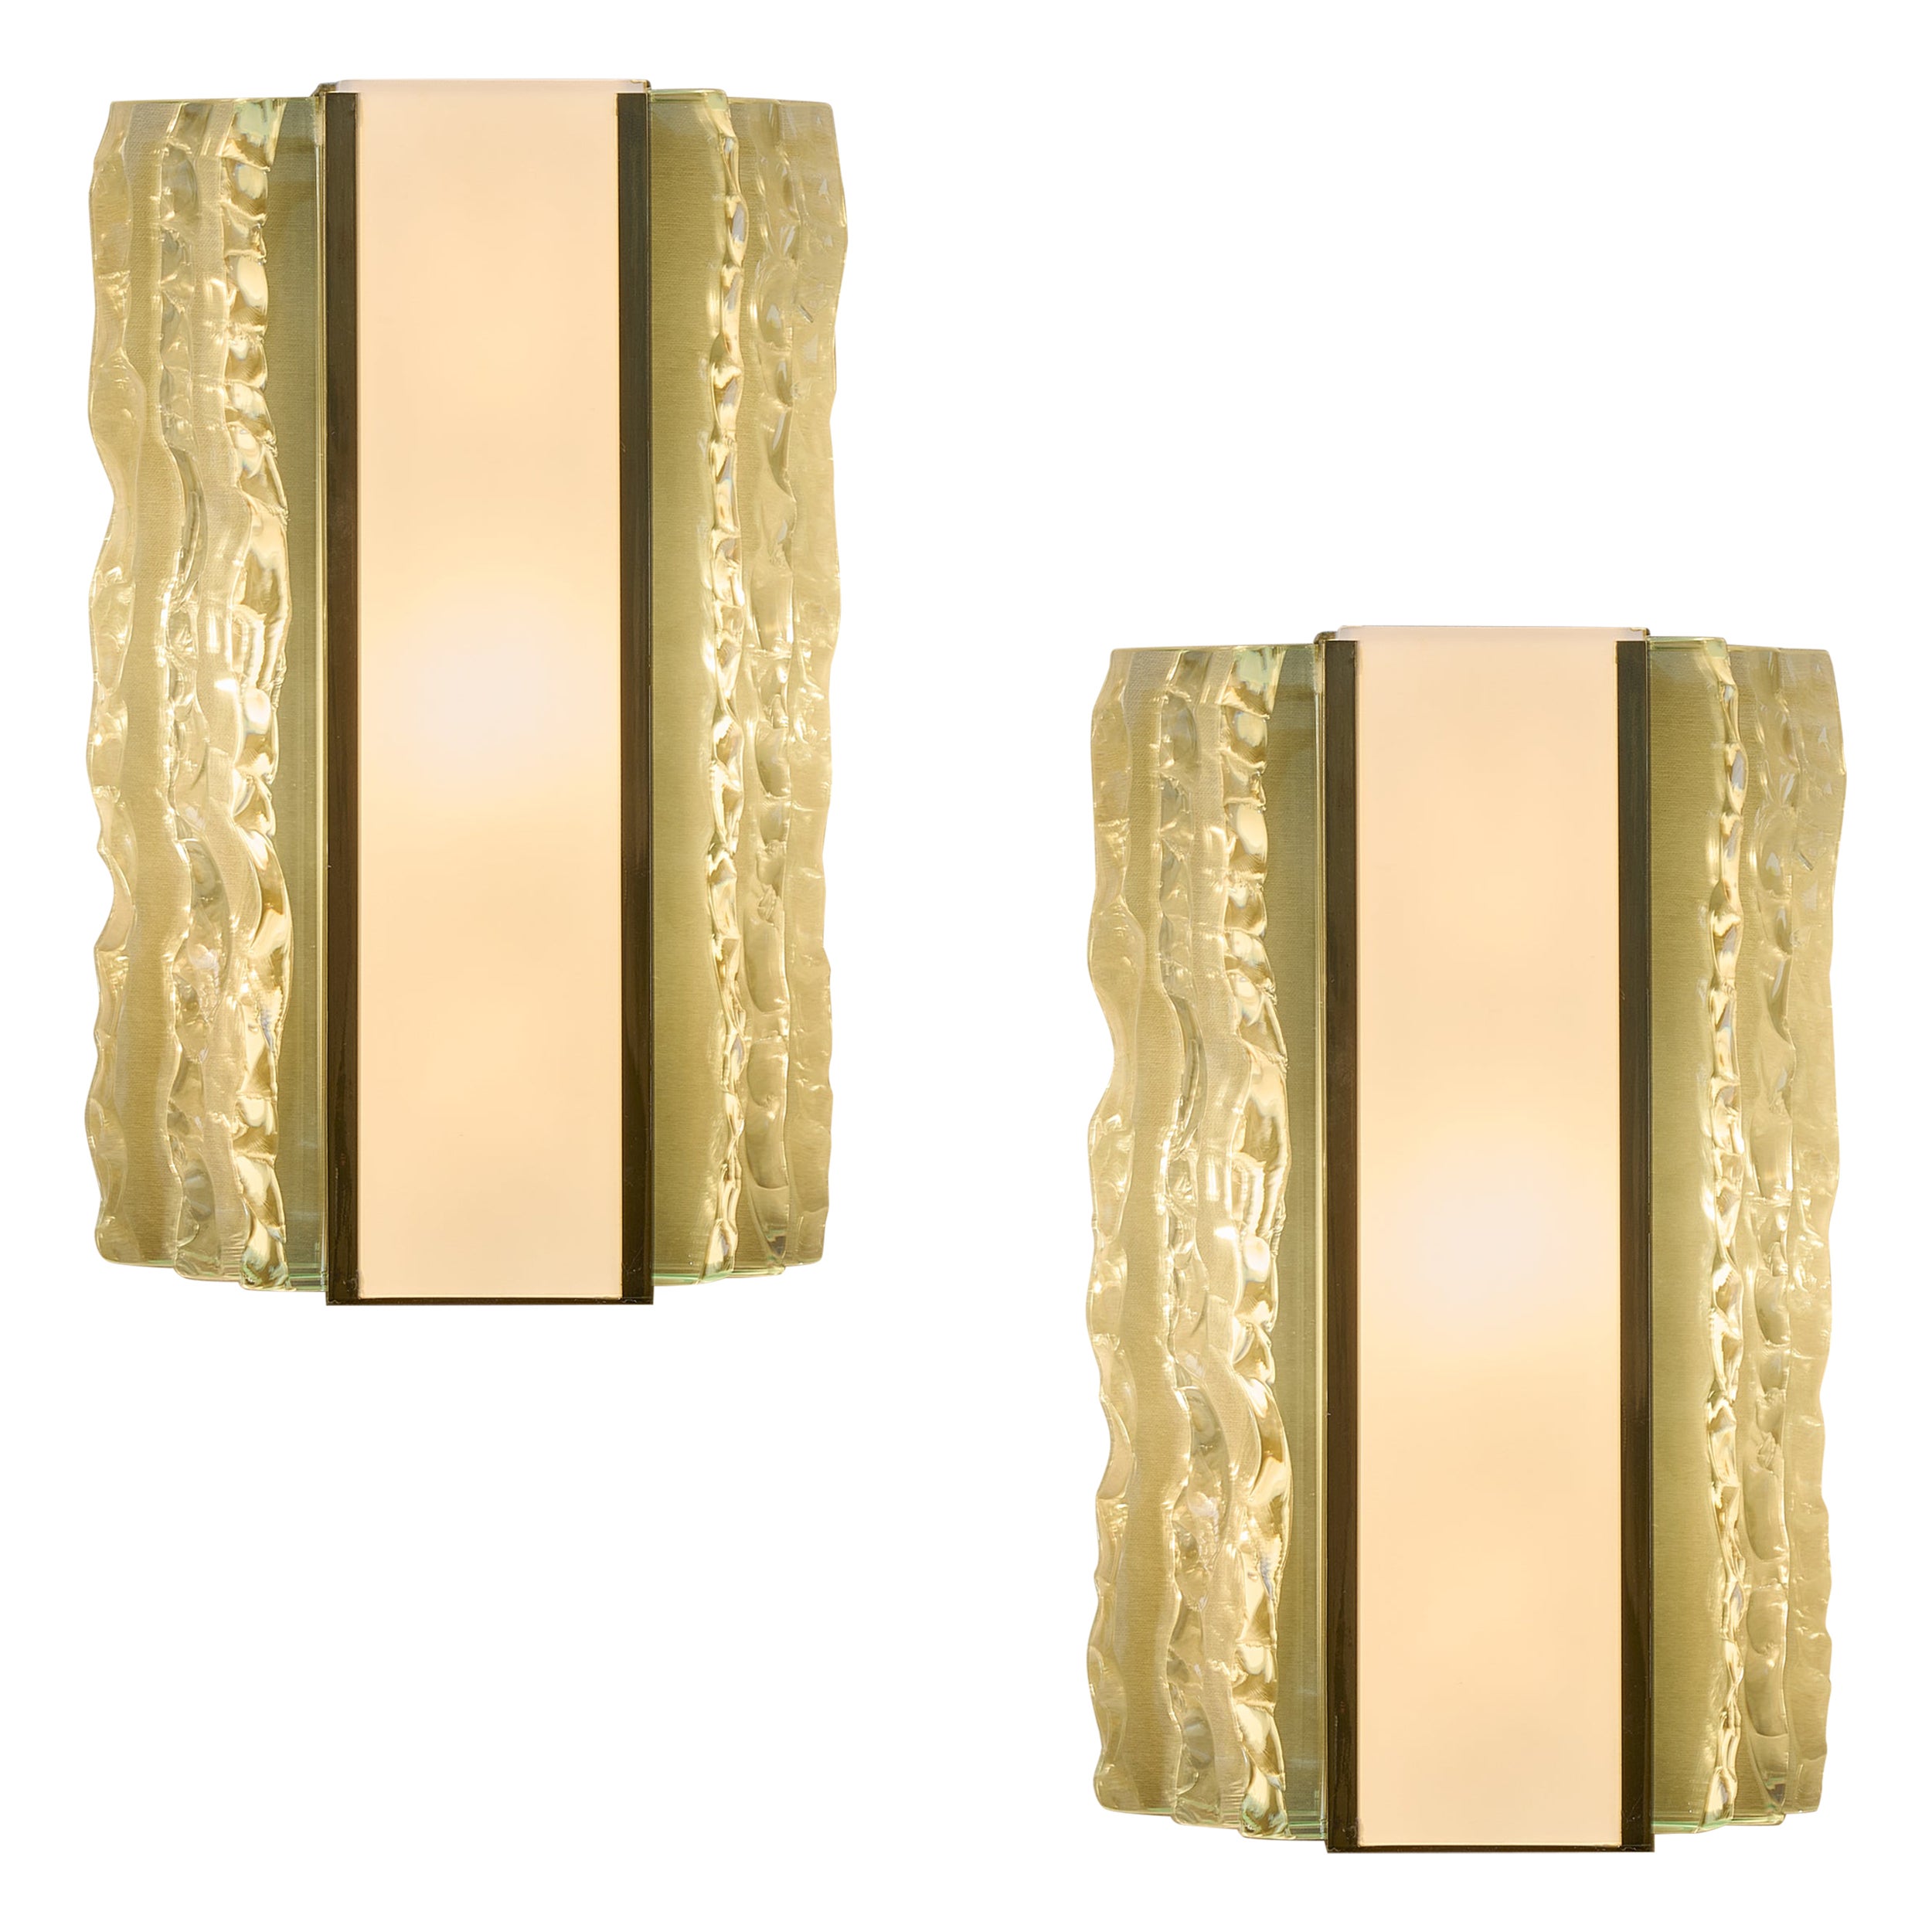 Max Ingrand for Fontana Arte: Pair of Cut Crystal and Brass Sconces, Italy 1954